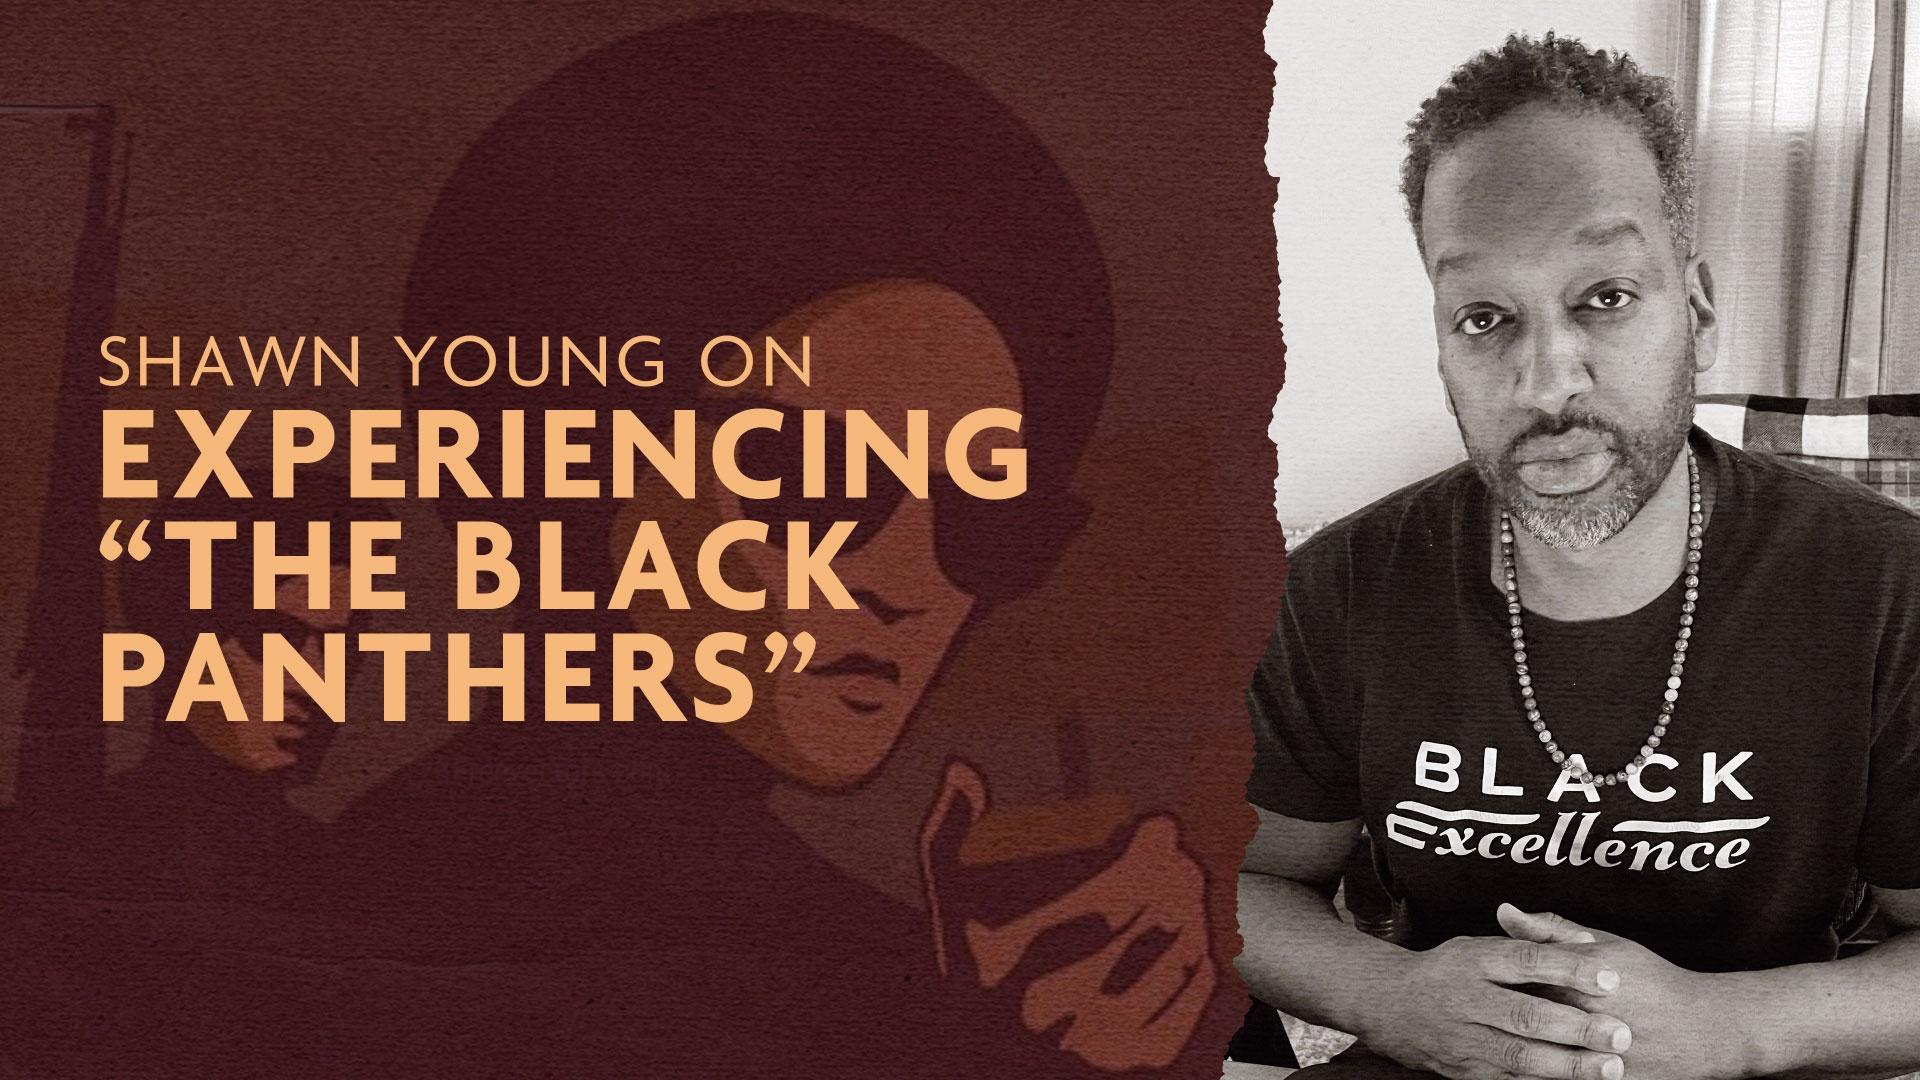 Shawn Young on experiencing “The Black Panthers”